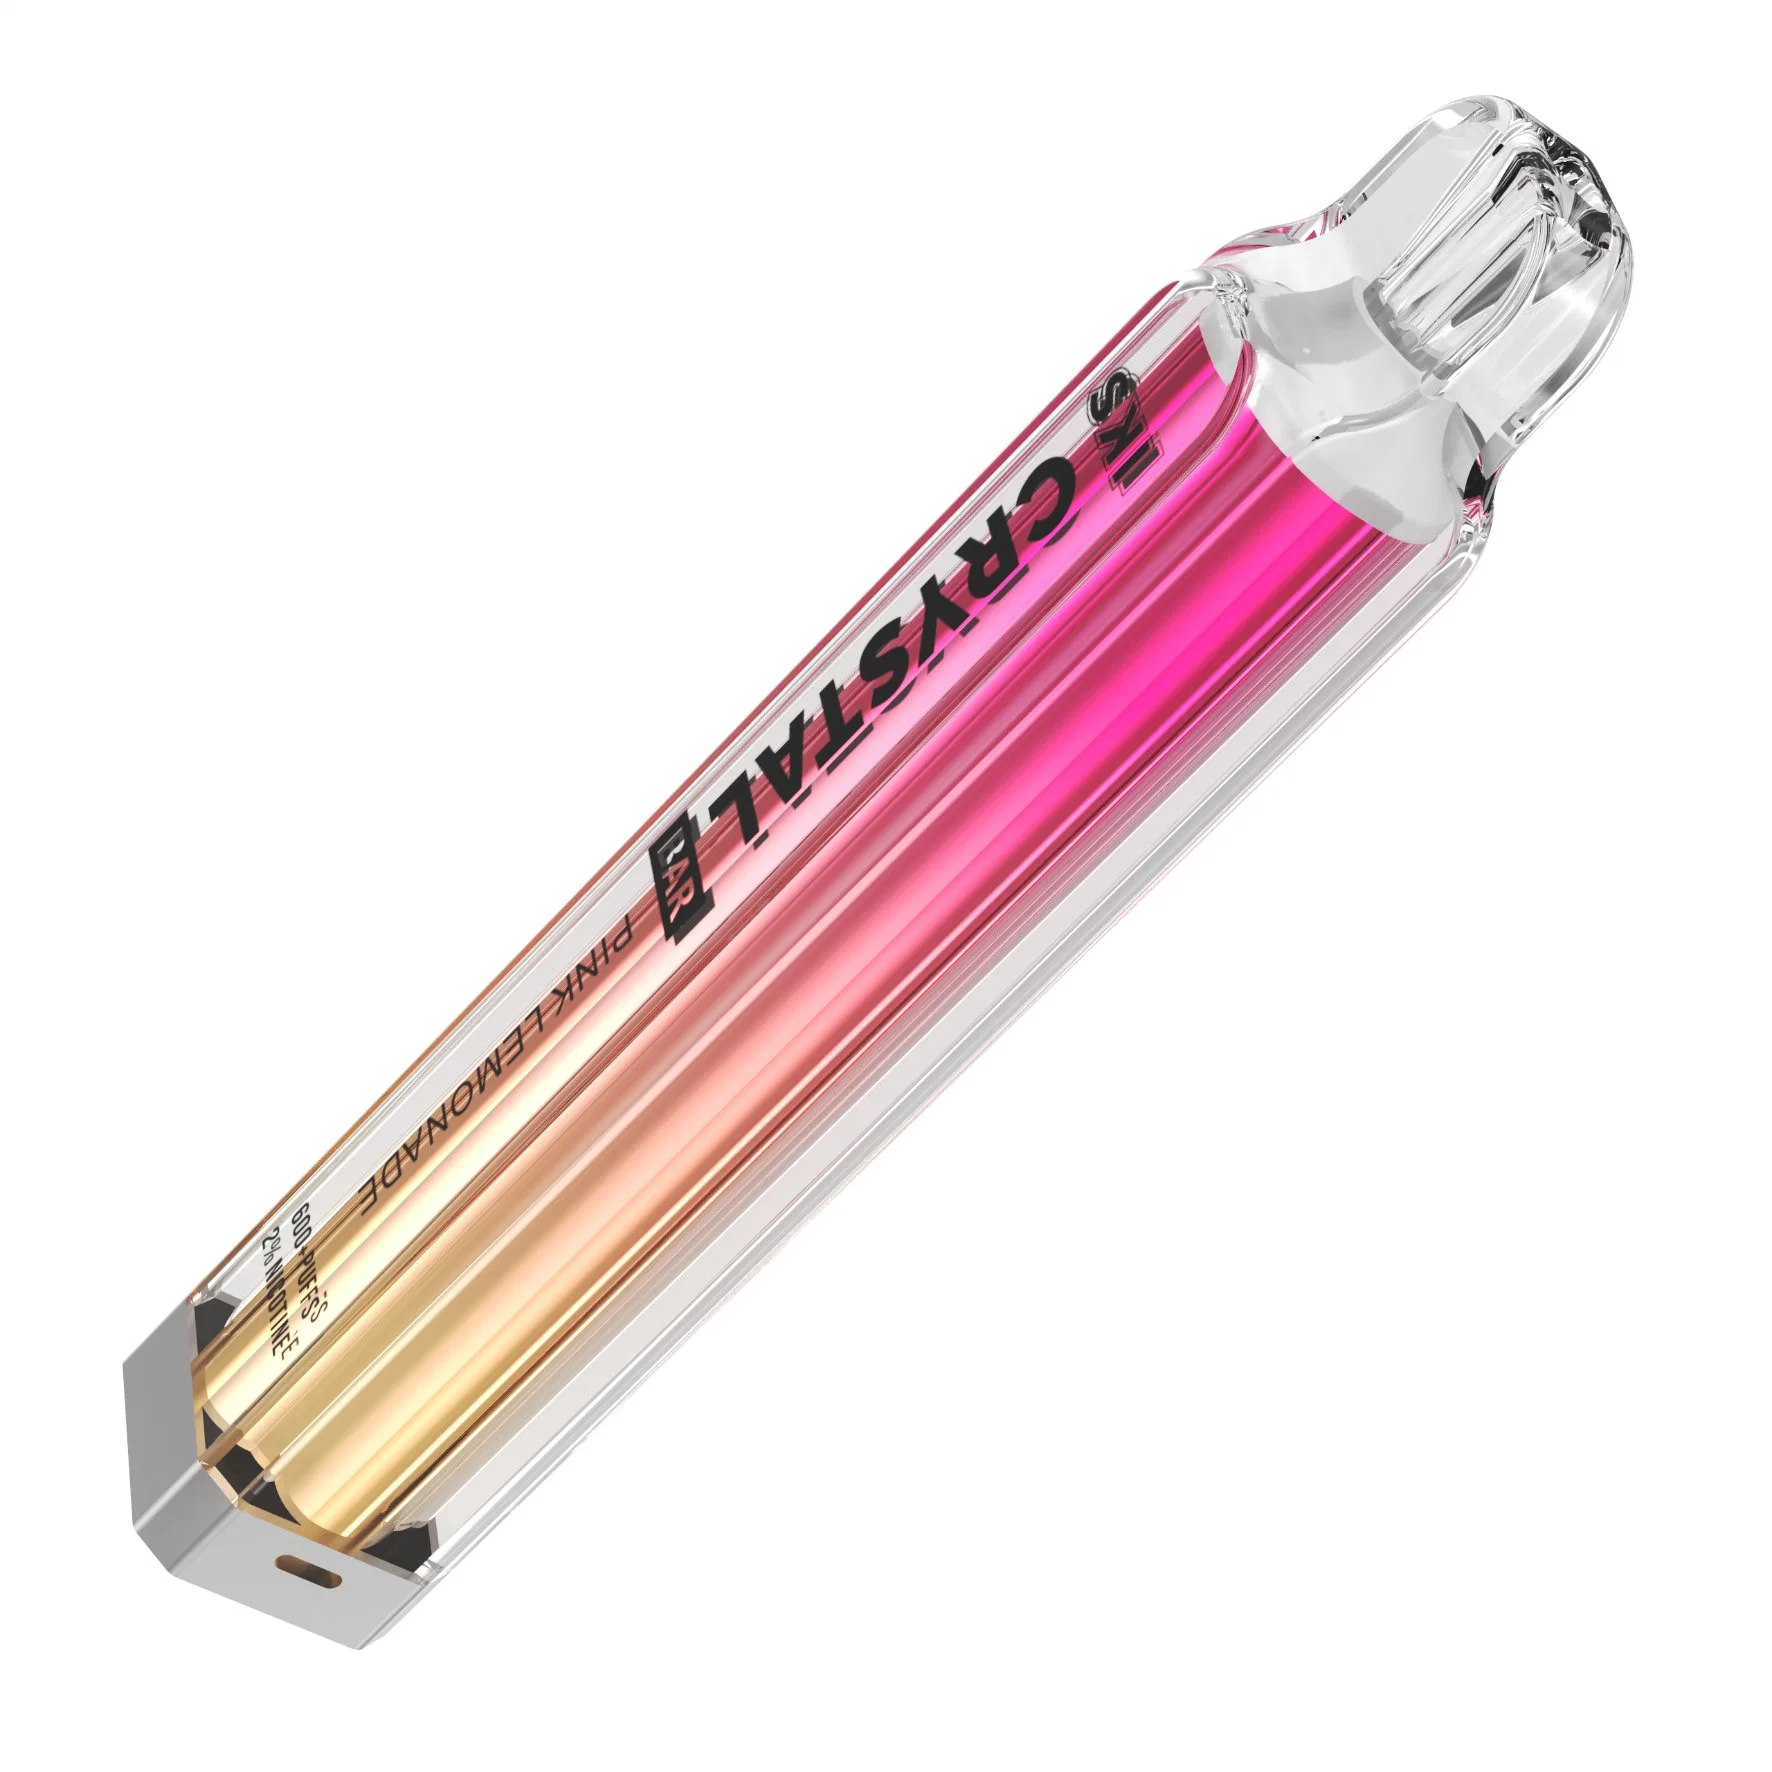 UK Hot-Selling Wholesale/Supplier E Cigarette Vape Ski Crystal 600 Puffs Super Smooth 2% Nicotine Oil Health Smoking Electronic Cigarette